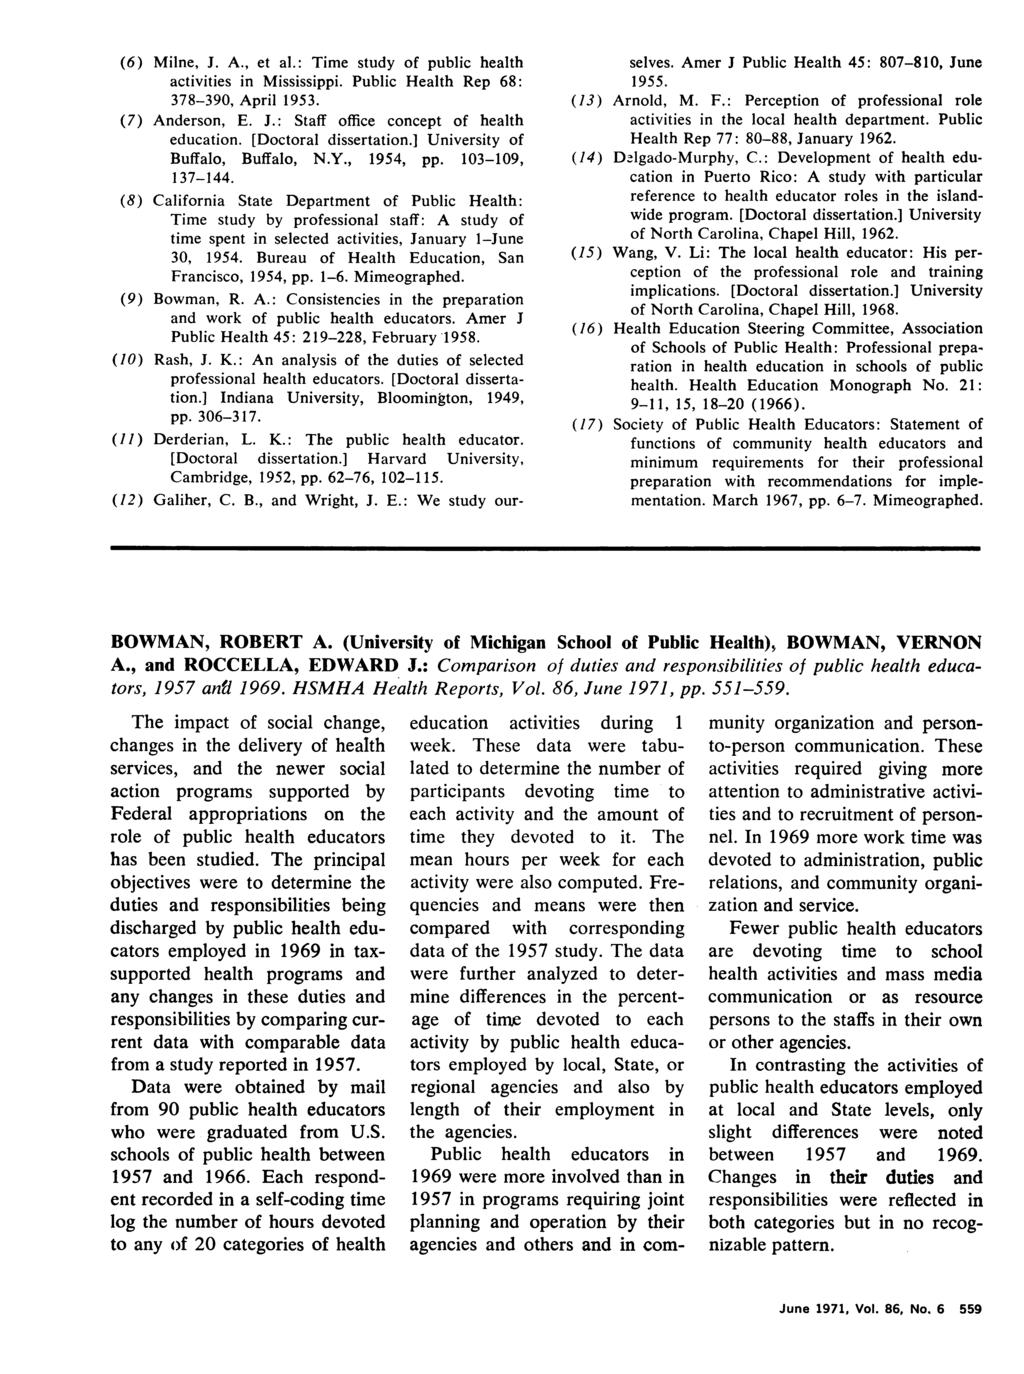 (6) Milne, J. A., et al.: Time study of public health activities in Mississippi. Public Health Rep 68: 378-390, April 1953. (7) Anderson, E. J.: Staff office concept of health education.